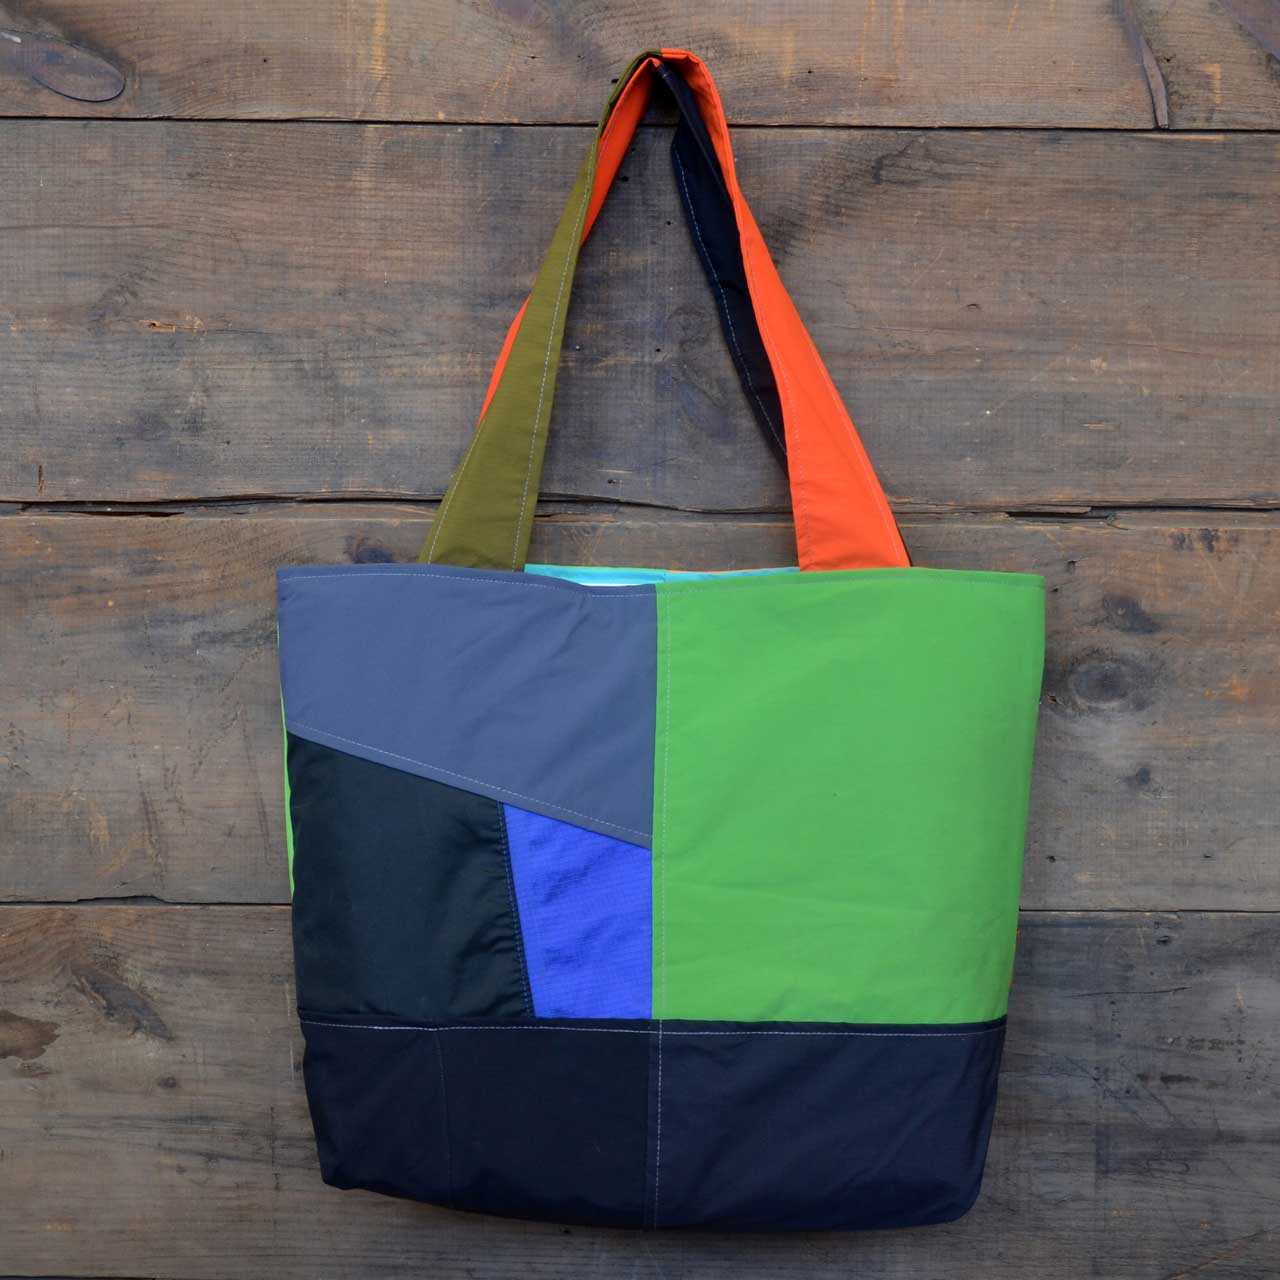 Limited edition “Patchwork” - Favorite Reusable Tote Bag